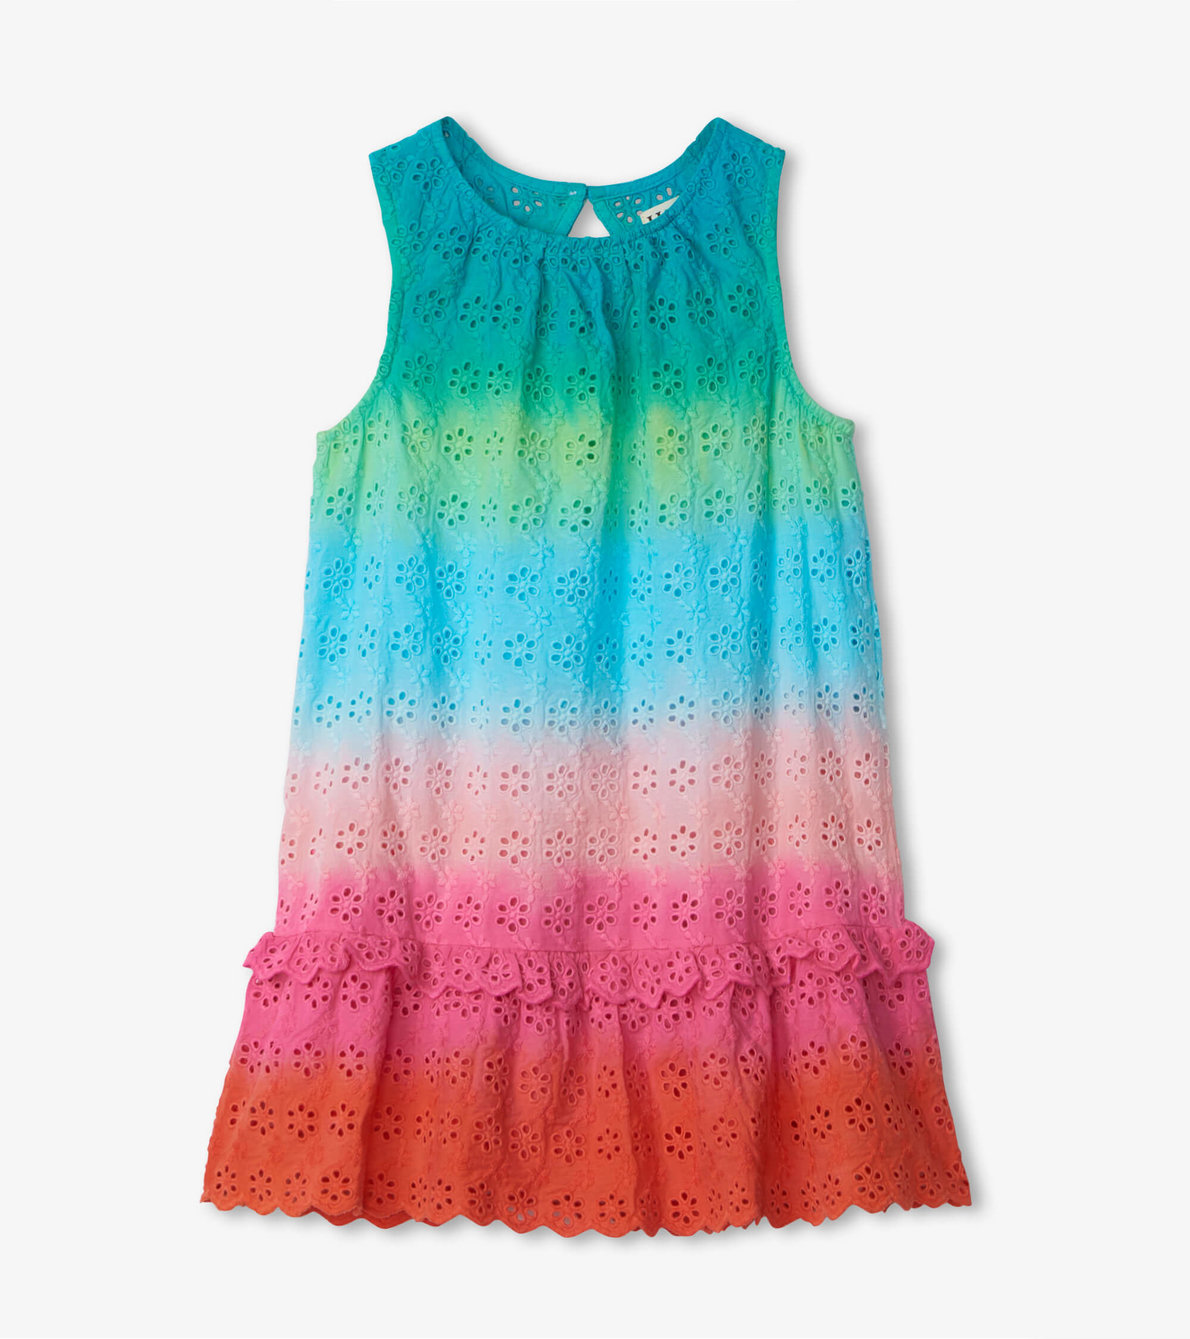 View larger image of Gradient Rainbow Woven Ruffle Dress